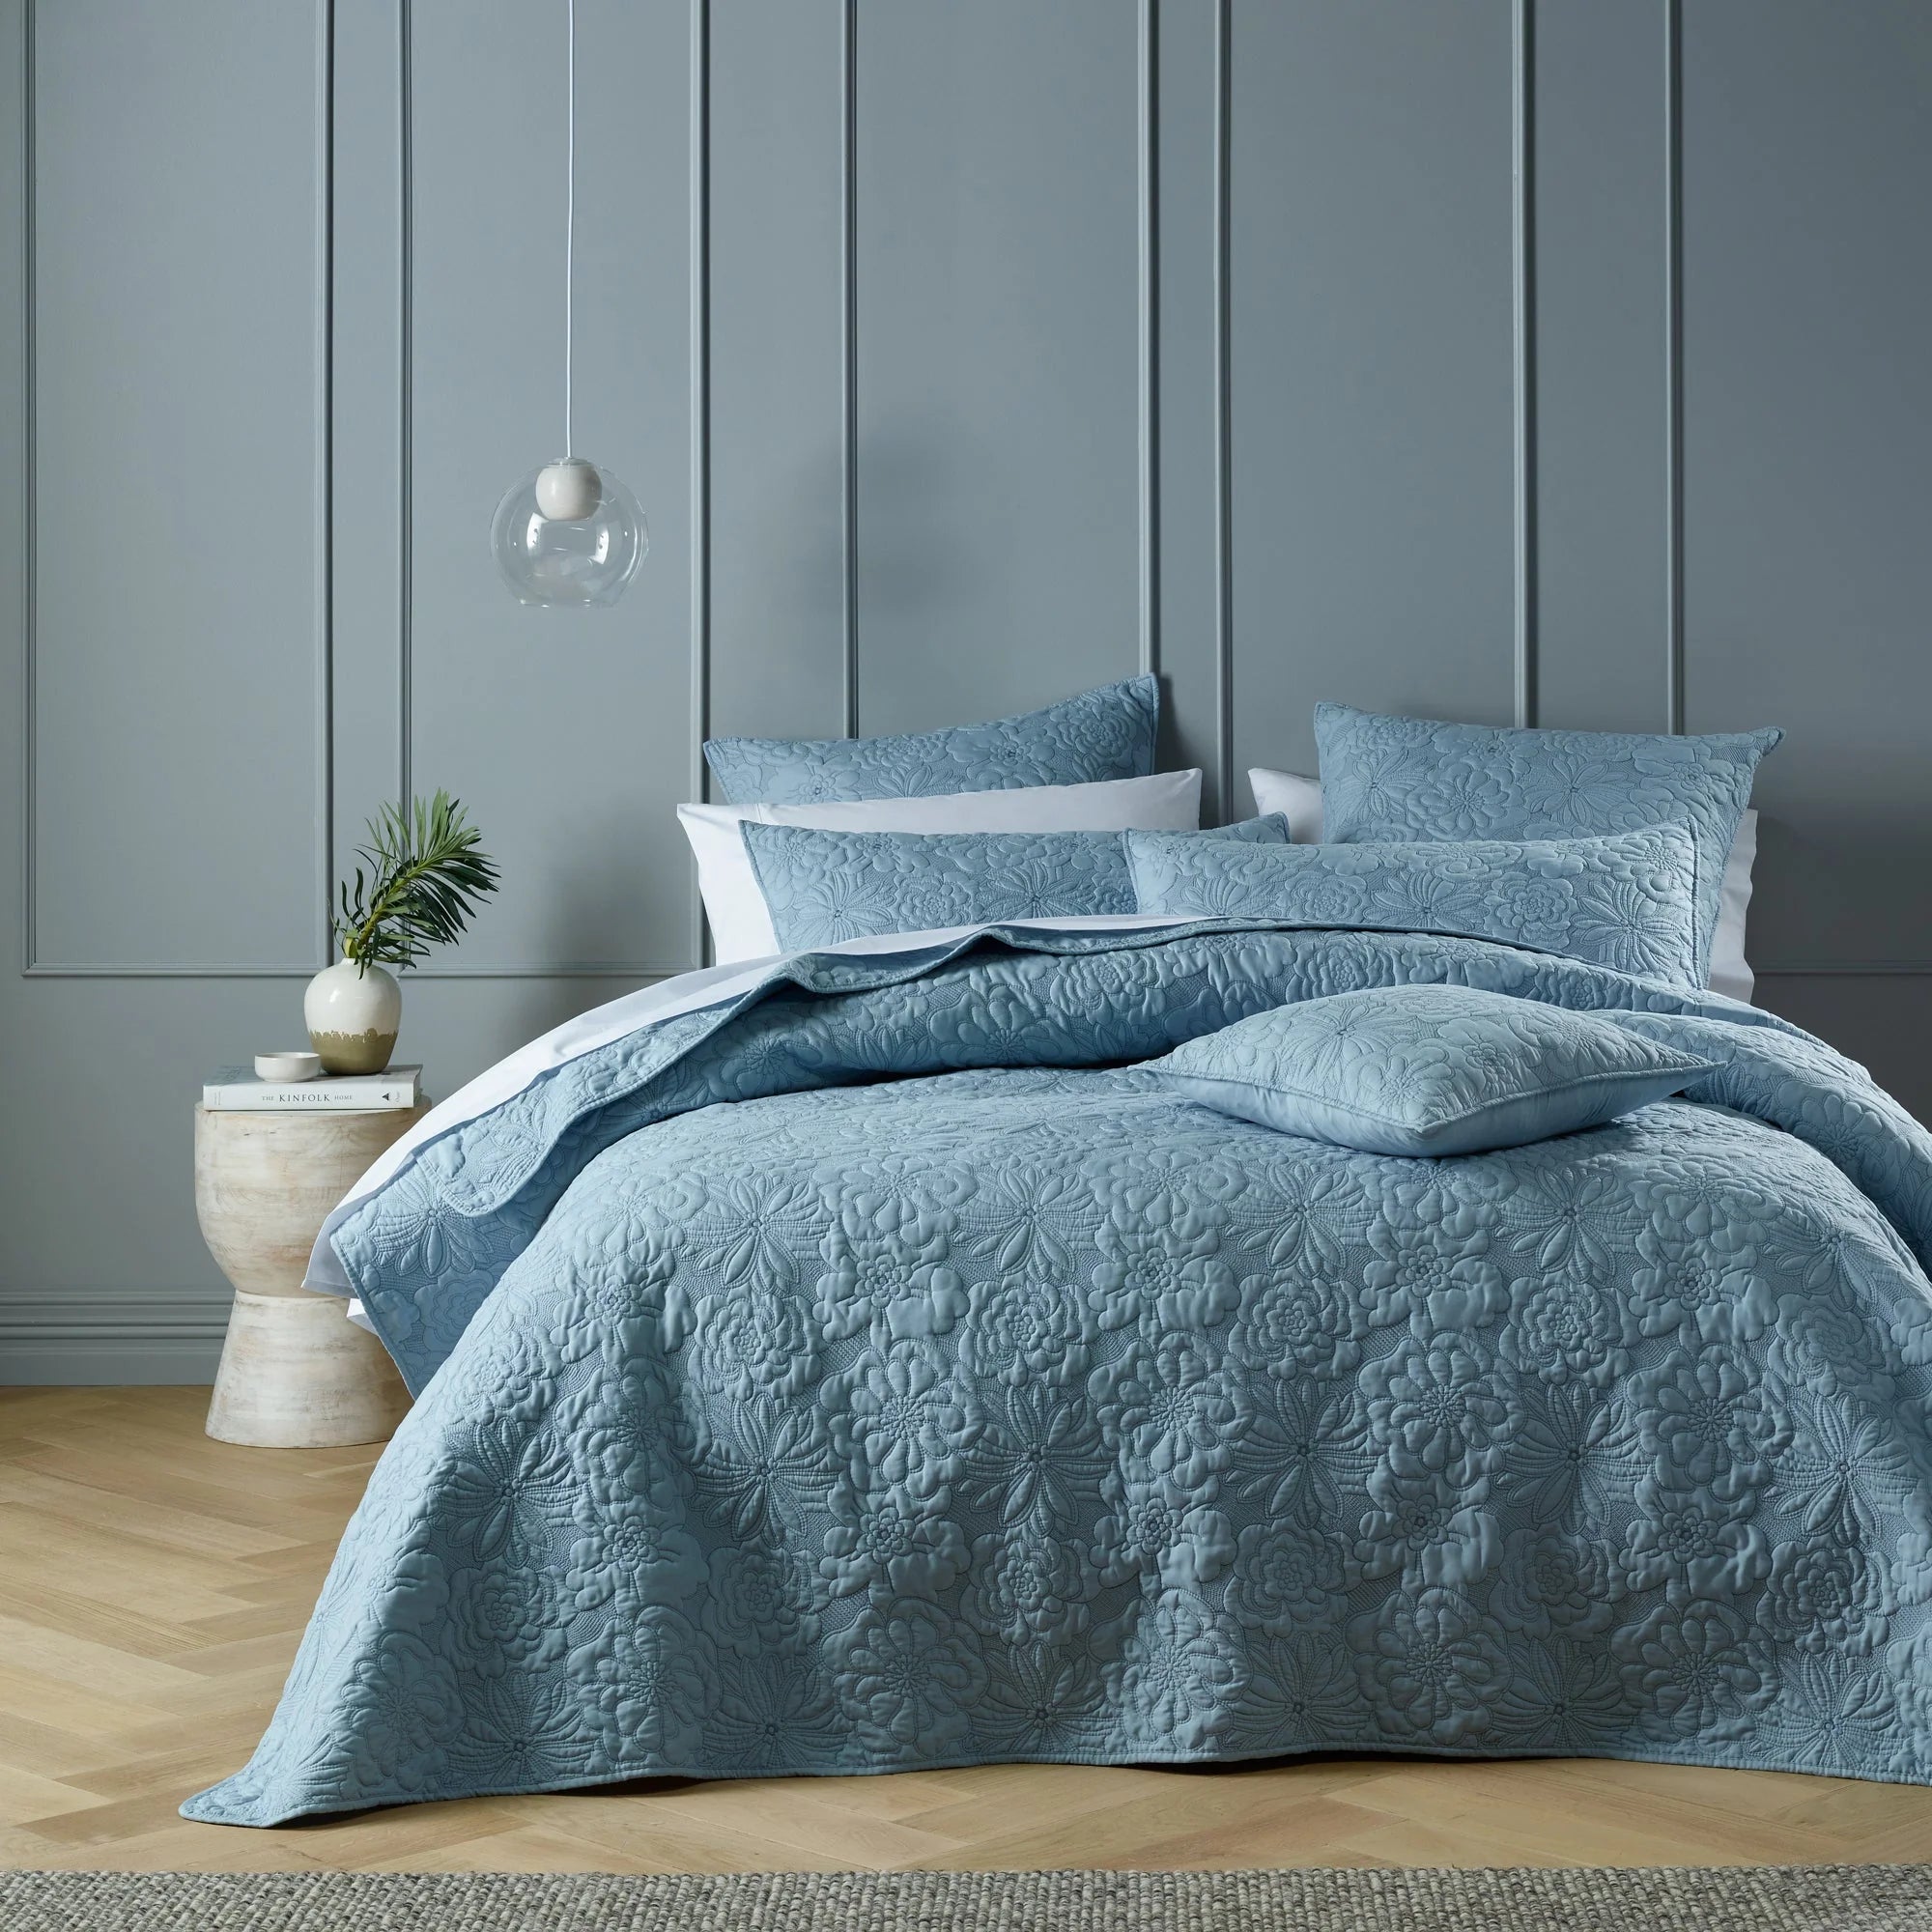 Introducing Sabrina, a truly stunning provincial blue bedspread that effortlessly merges classic charm with contemporary elegance. 